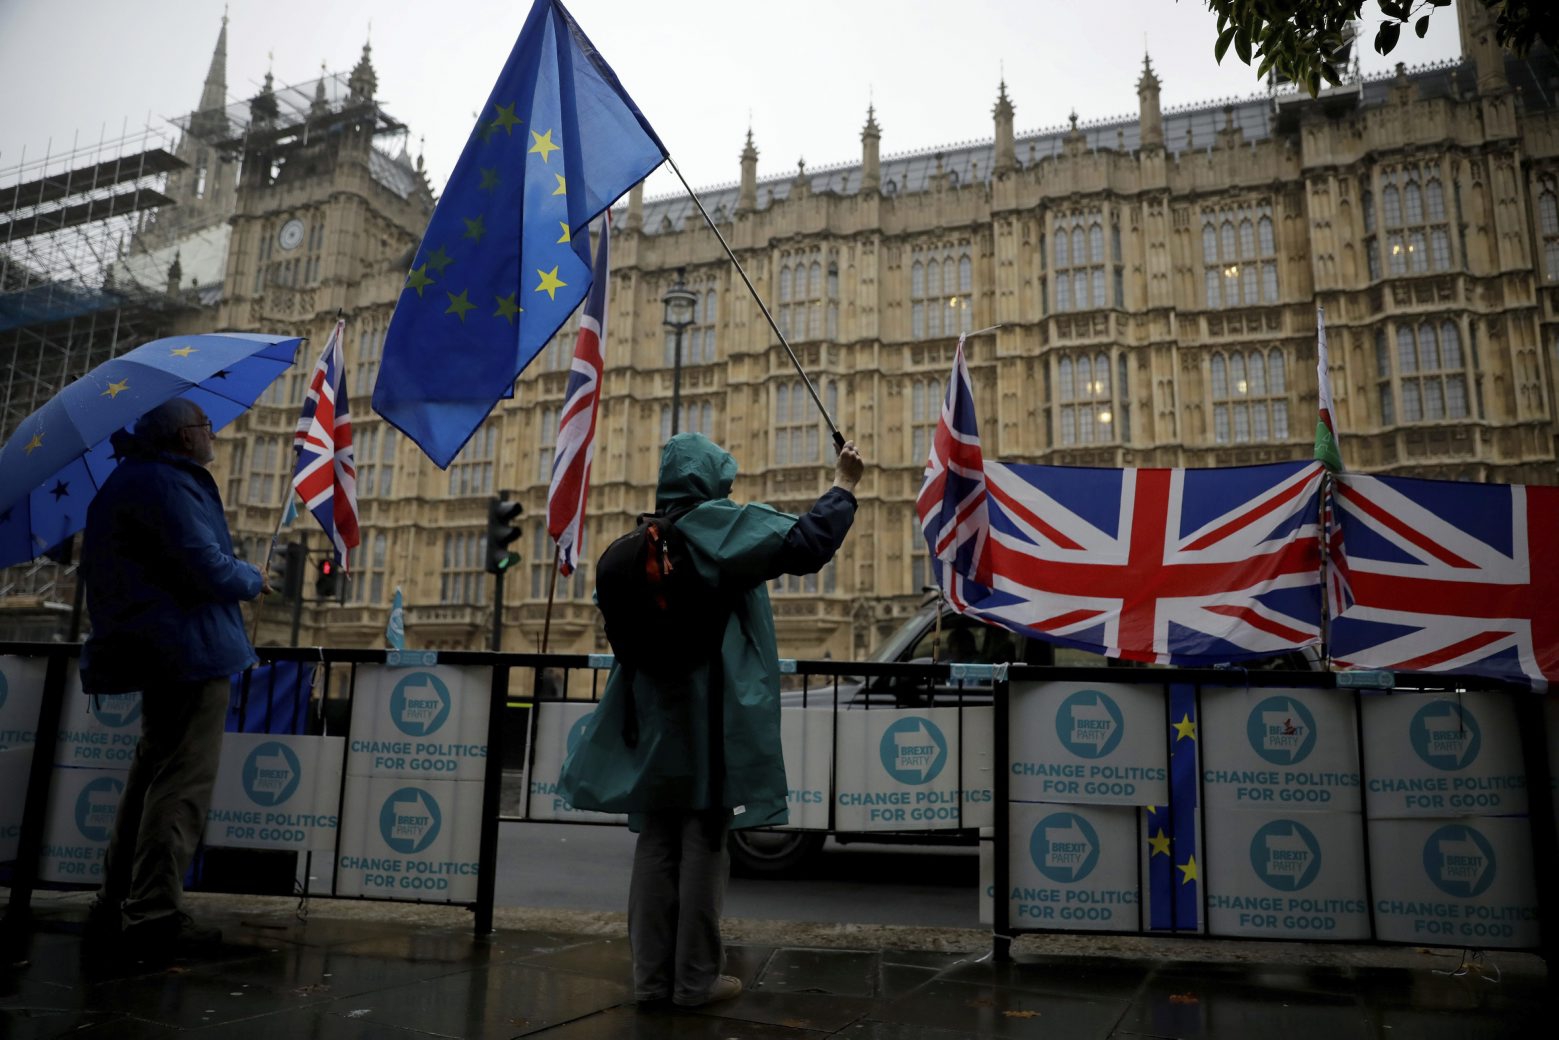 Anti-Brexit remain in the European Union supporters protest backdropped by the Houses of Parliament in London, Thursday, Oct. 24, 2019. Britain's Prime Minister Boris Johnson won Parliament's backing for his exit deal on Wednesday, but then lost a key vote on its timing, effectively guaranteeing that Brexit won't happen on the scheduled date of Oct. 31.  (AP Photo/Matt Dunham) Britain Brexit